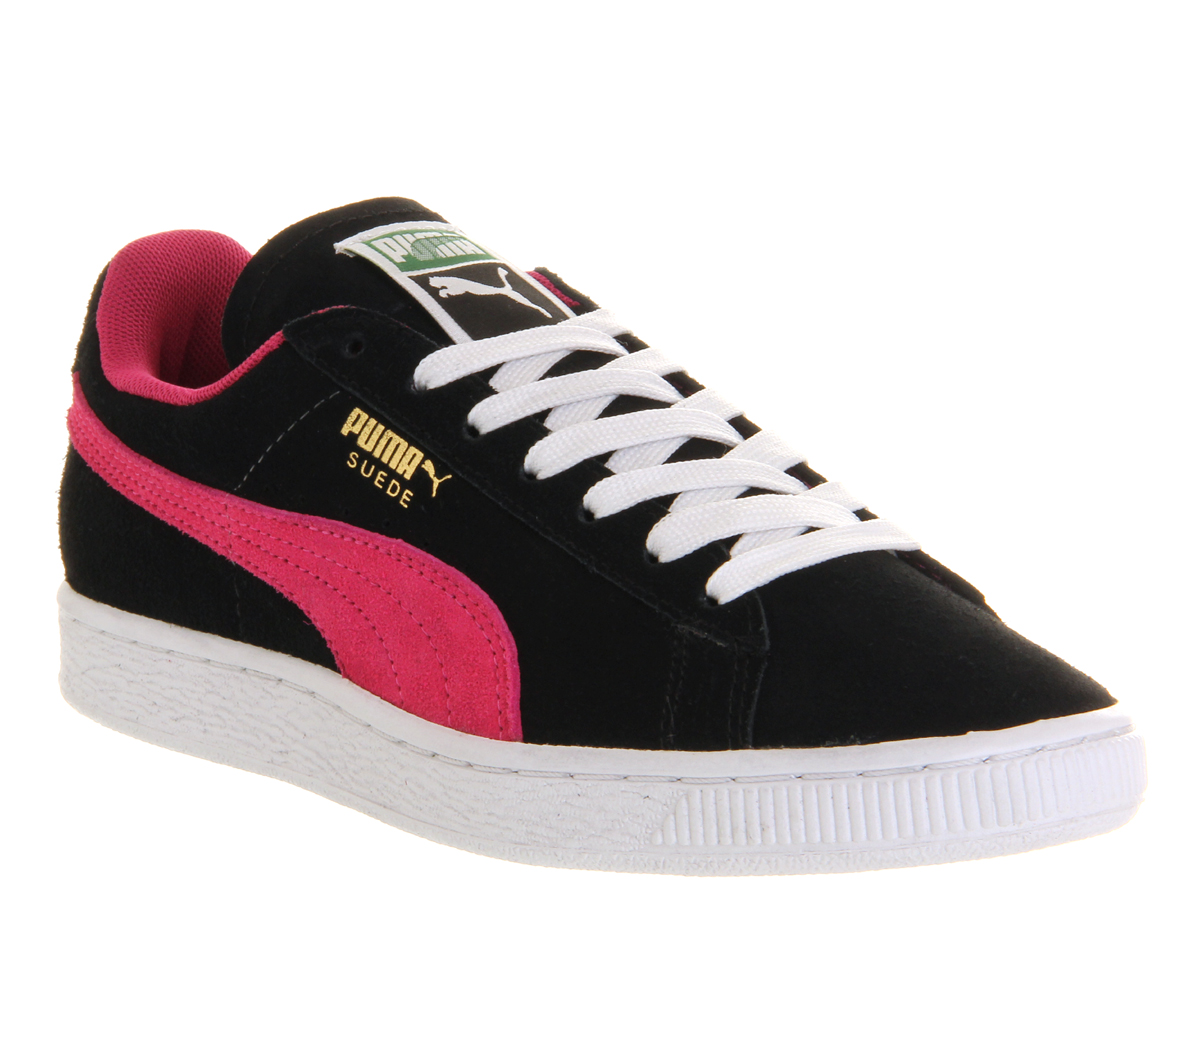 puma suede black and pink - 60% remise 